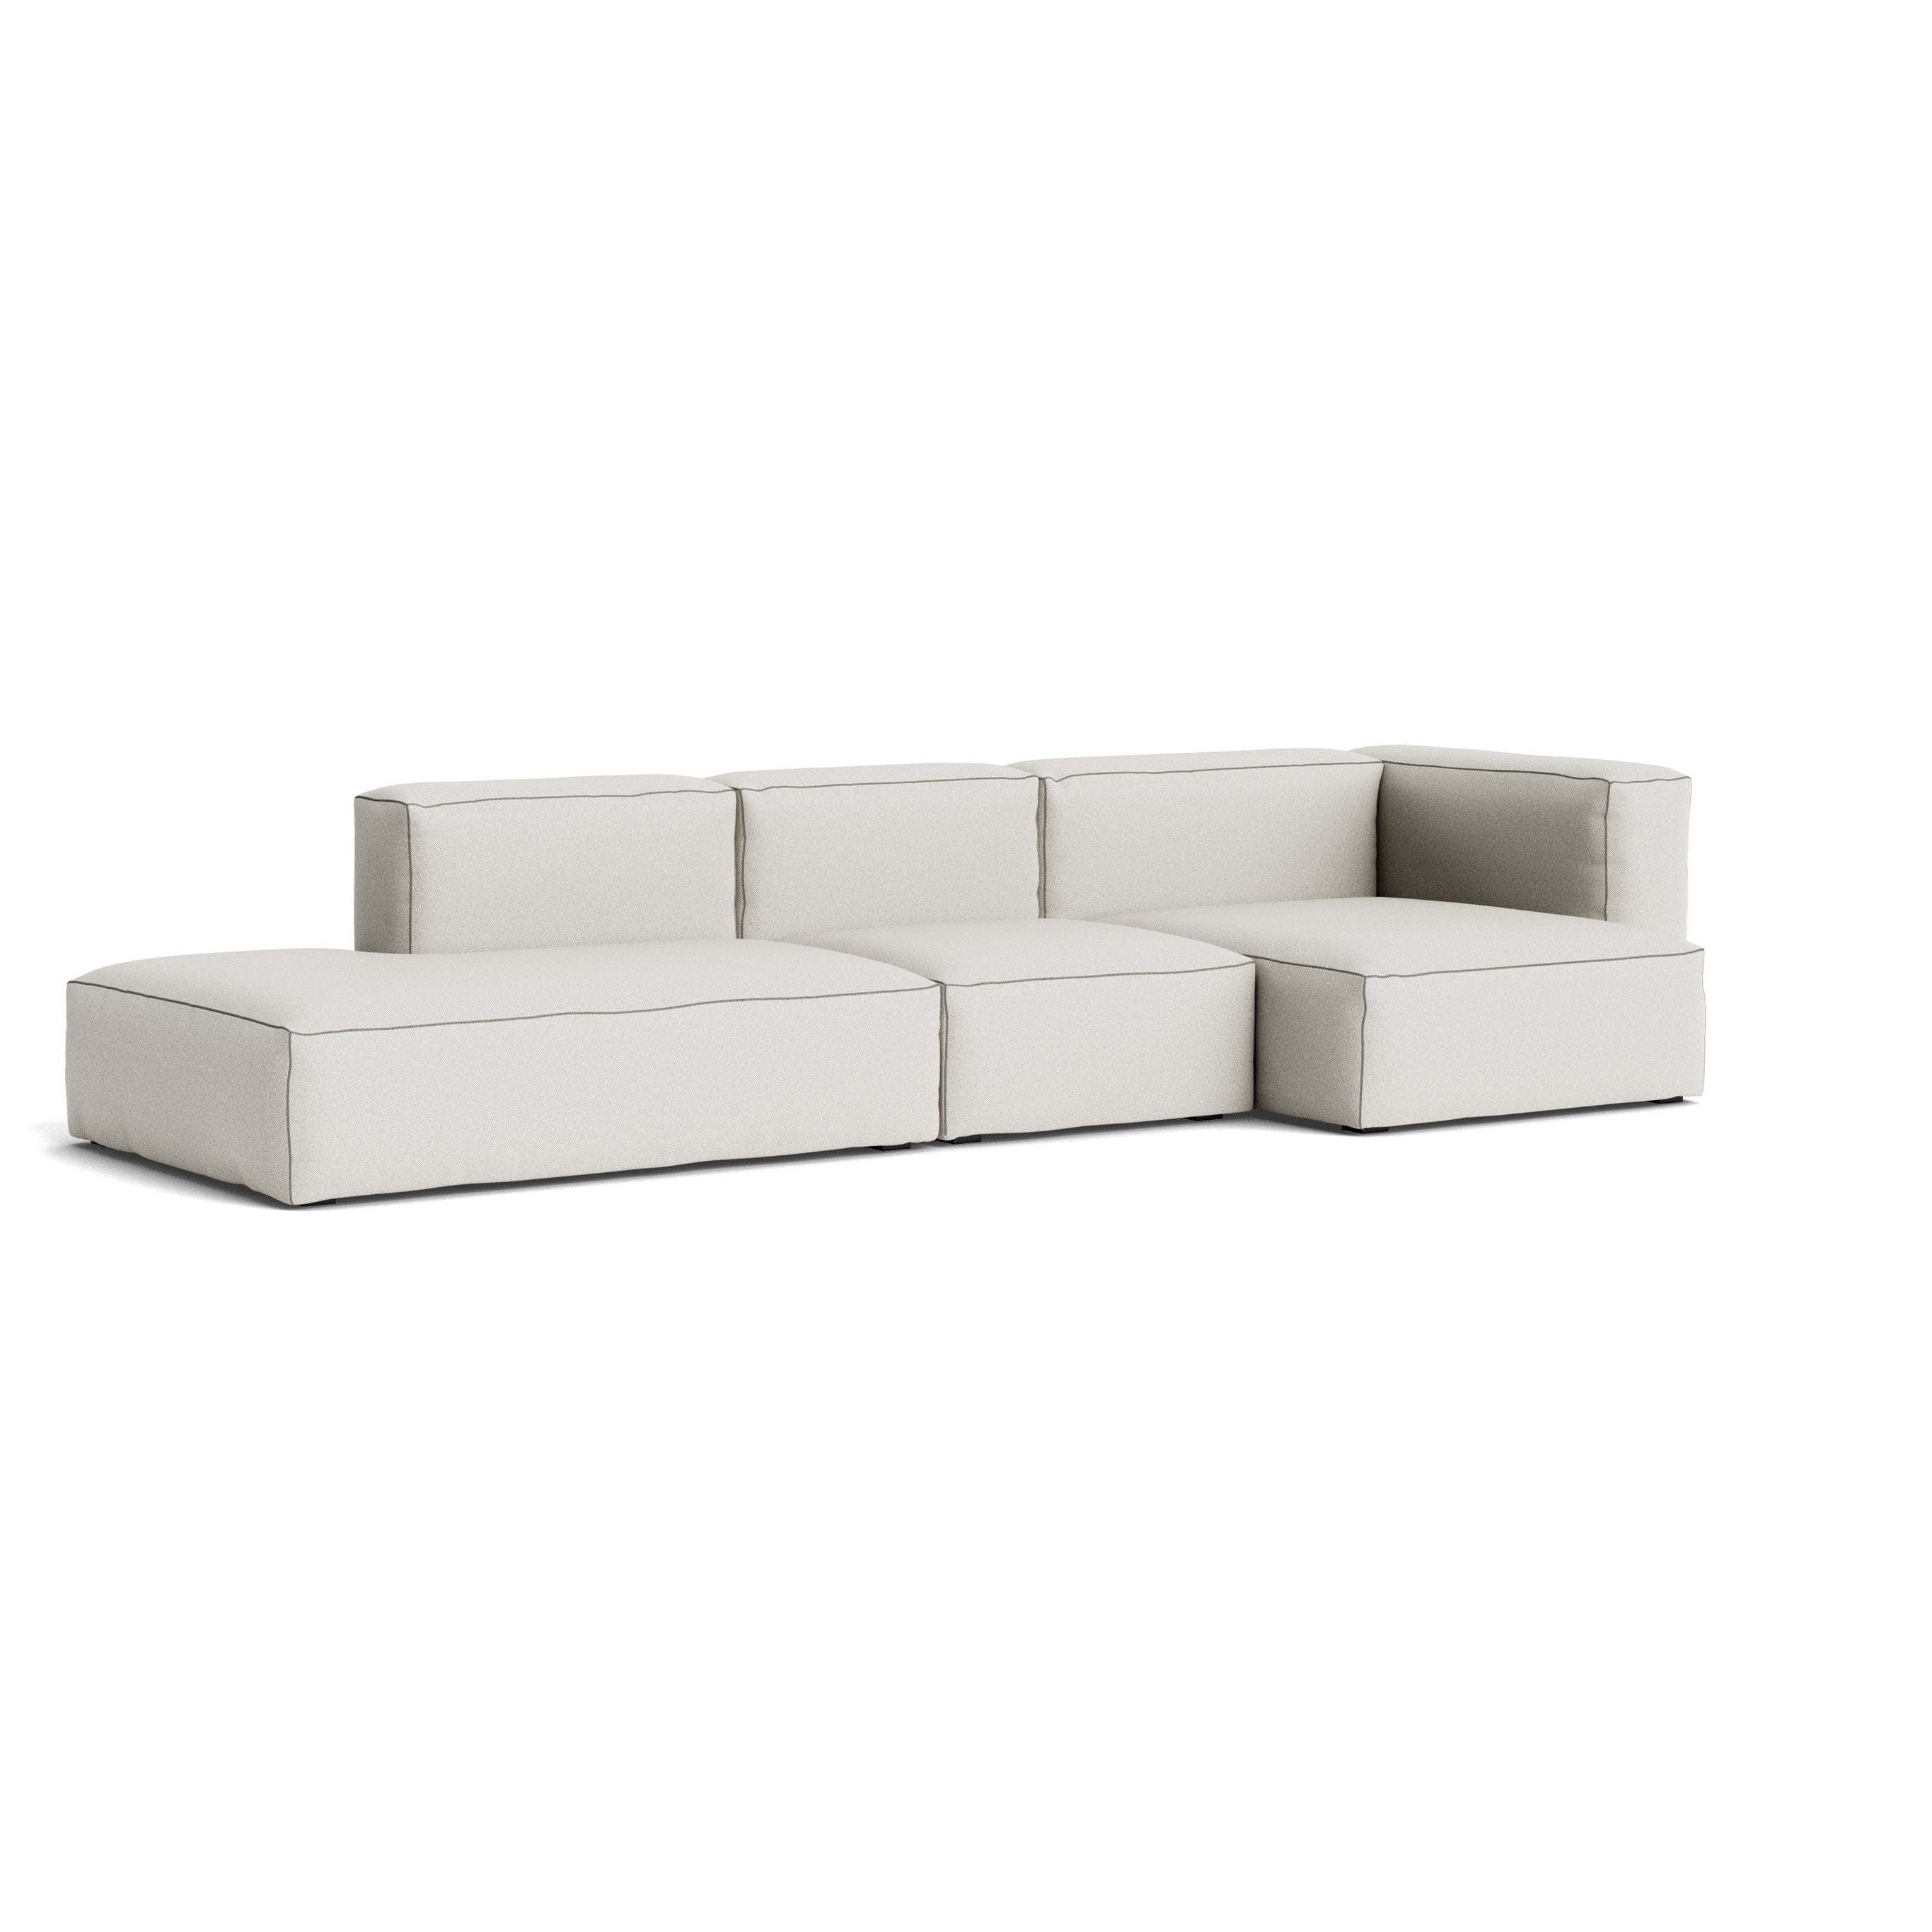 HAY Mags Soft Sofa 3 Seater - Combination 4